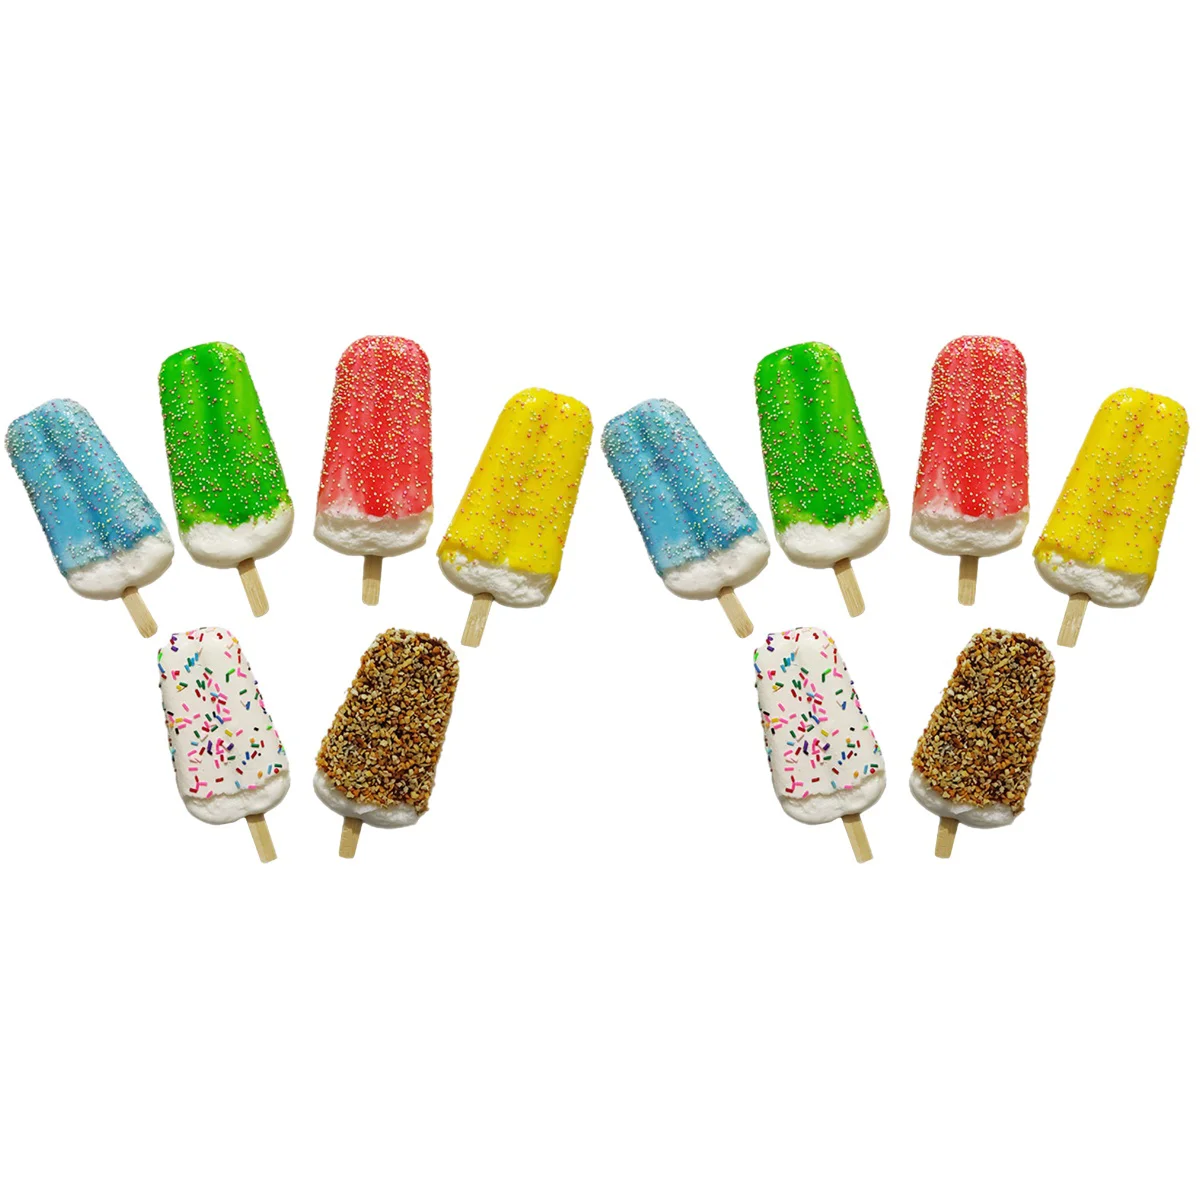 

12 pcs Simulation Ice-lolly Realistic Stick Ice Cream Models Ice Candy Models